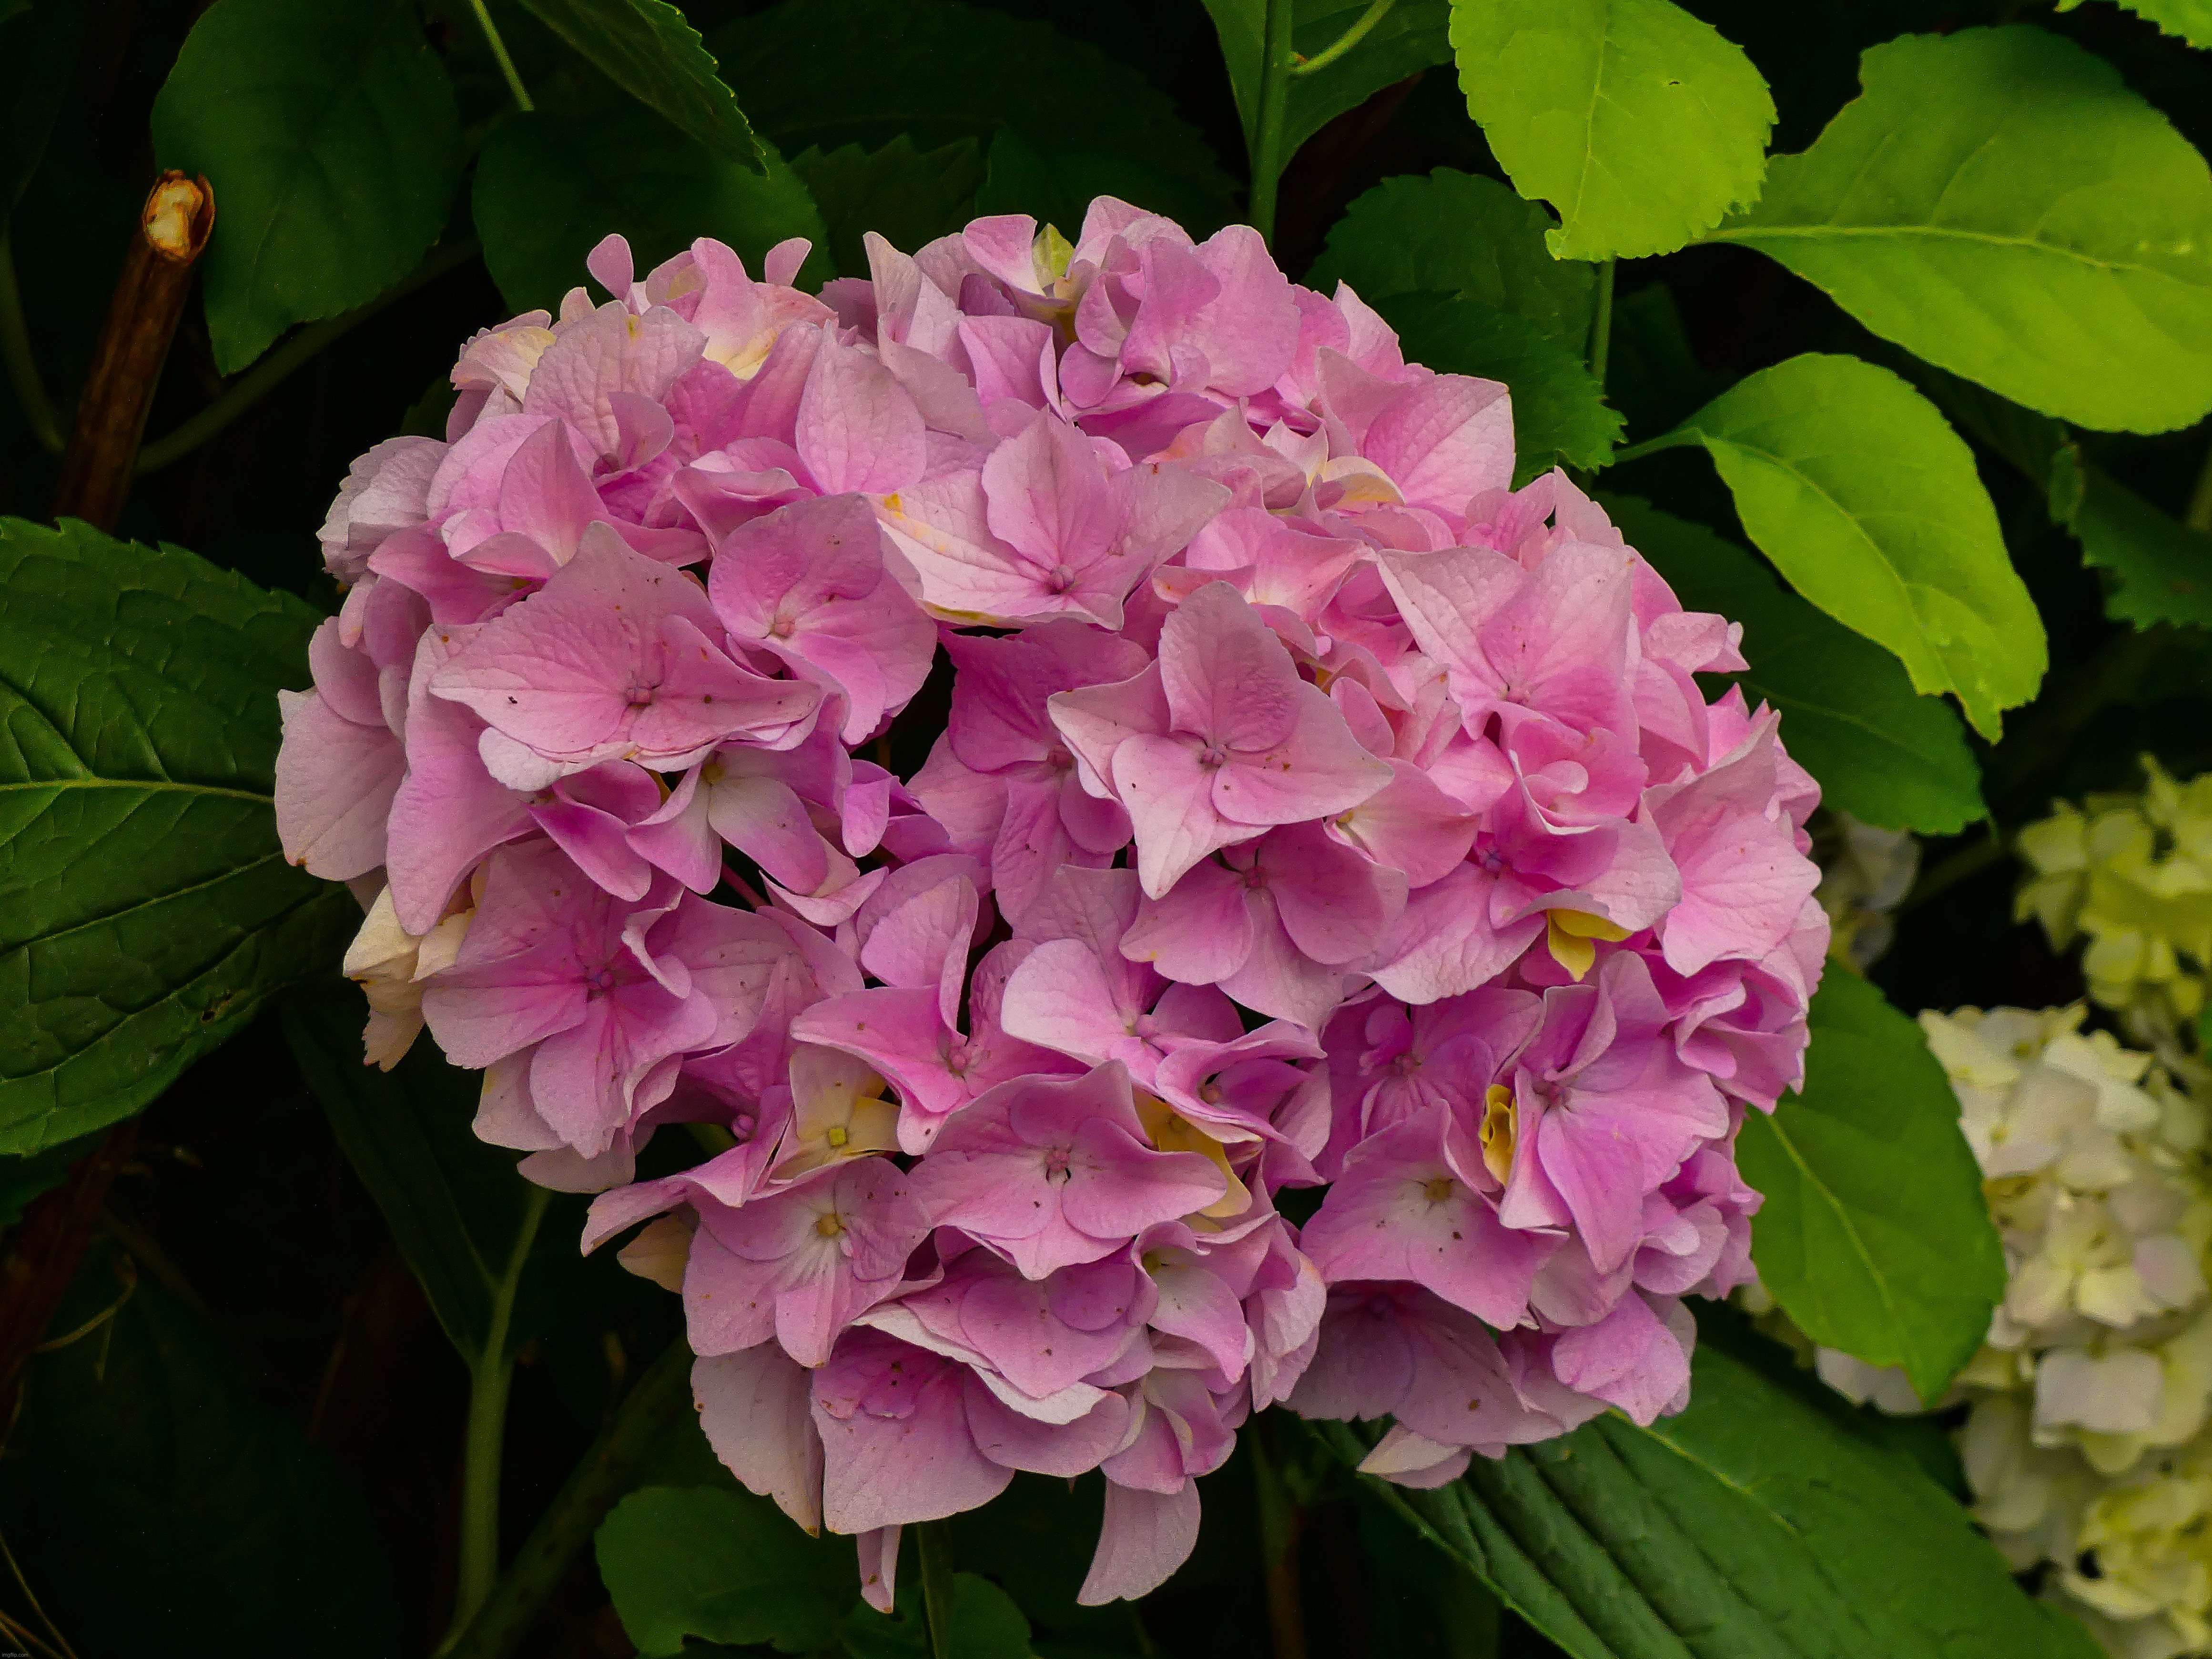 Hydrangea Flowers | image tagged in share your own photos | made w/ Imgflip meme maker